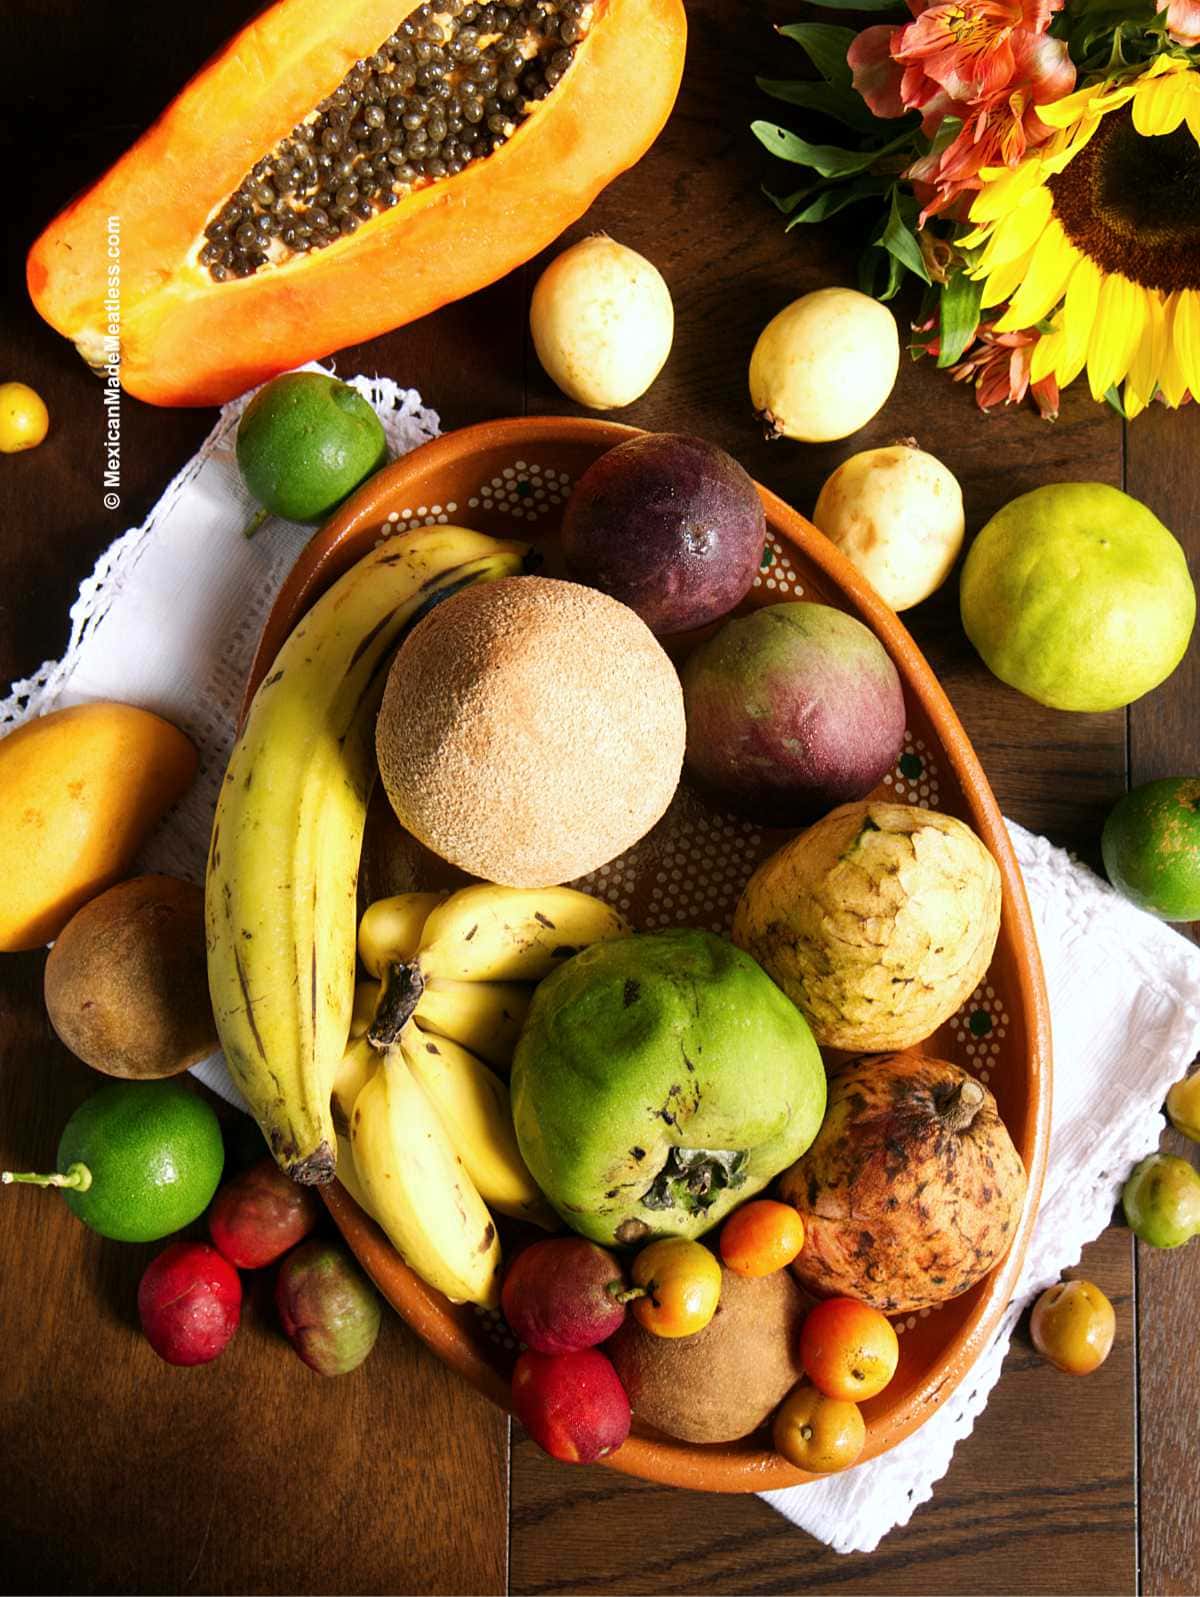 View from above of a wood table filled with exotic Mexican tropical fruits.